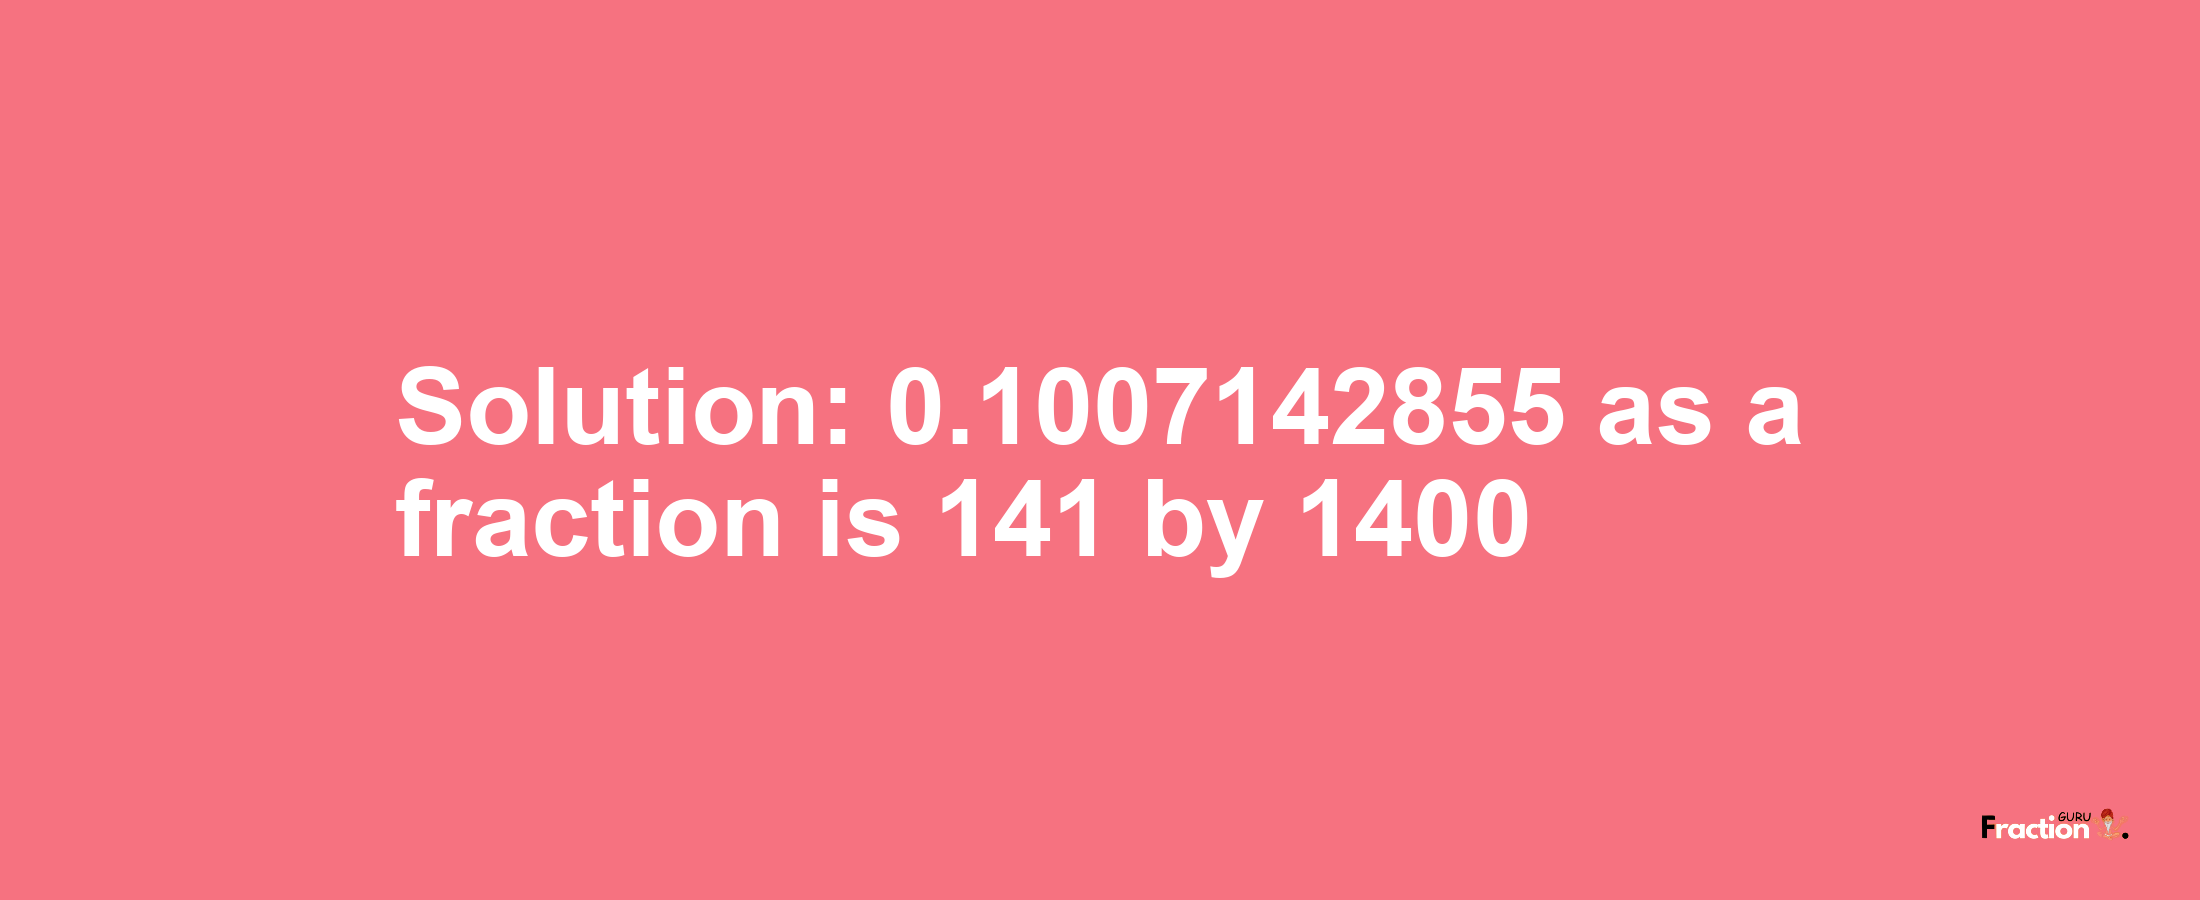 Solution:0.1007142855 as a fraction is 141/1400